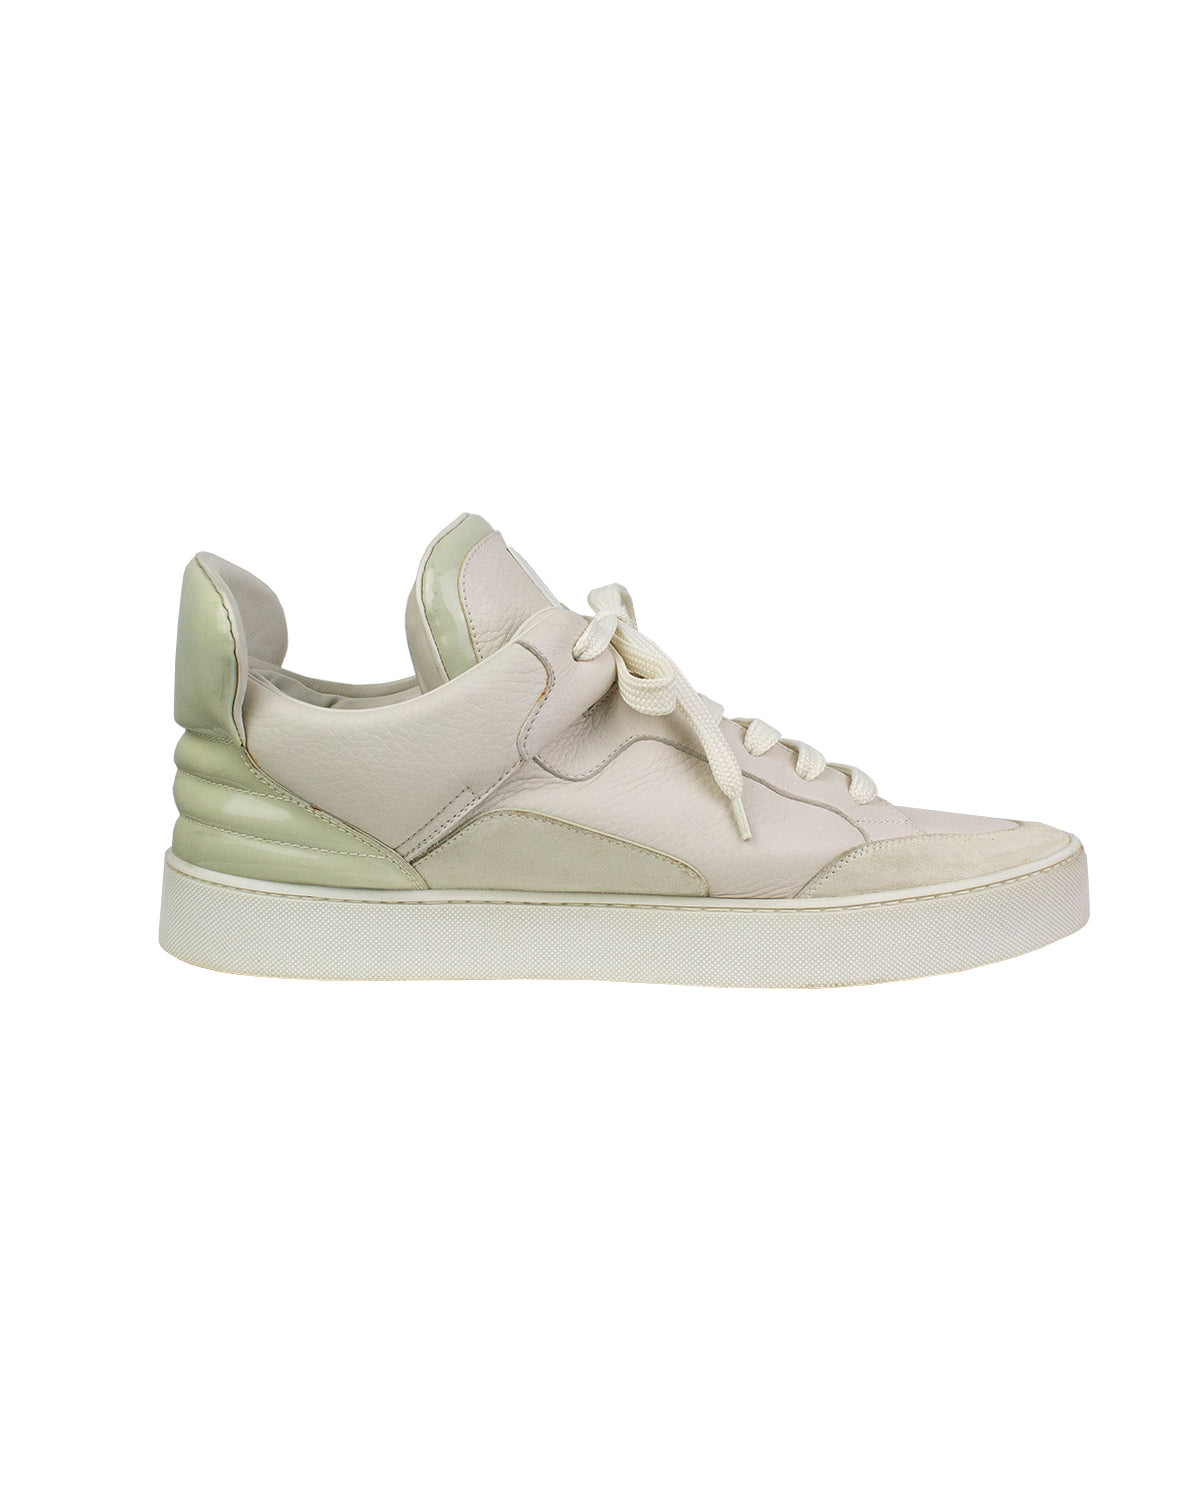 LOUIS VUITTON X KANYE WEST Calfskin Suede Don Sneakers 8.5 Cream 1089171